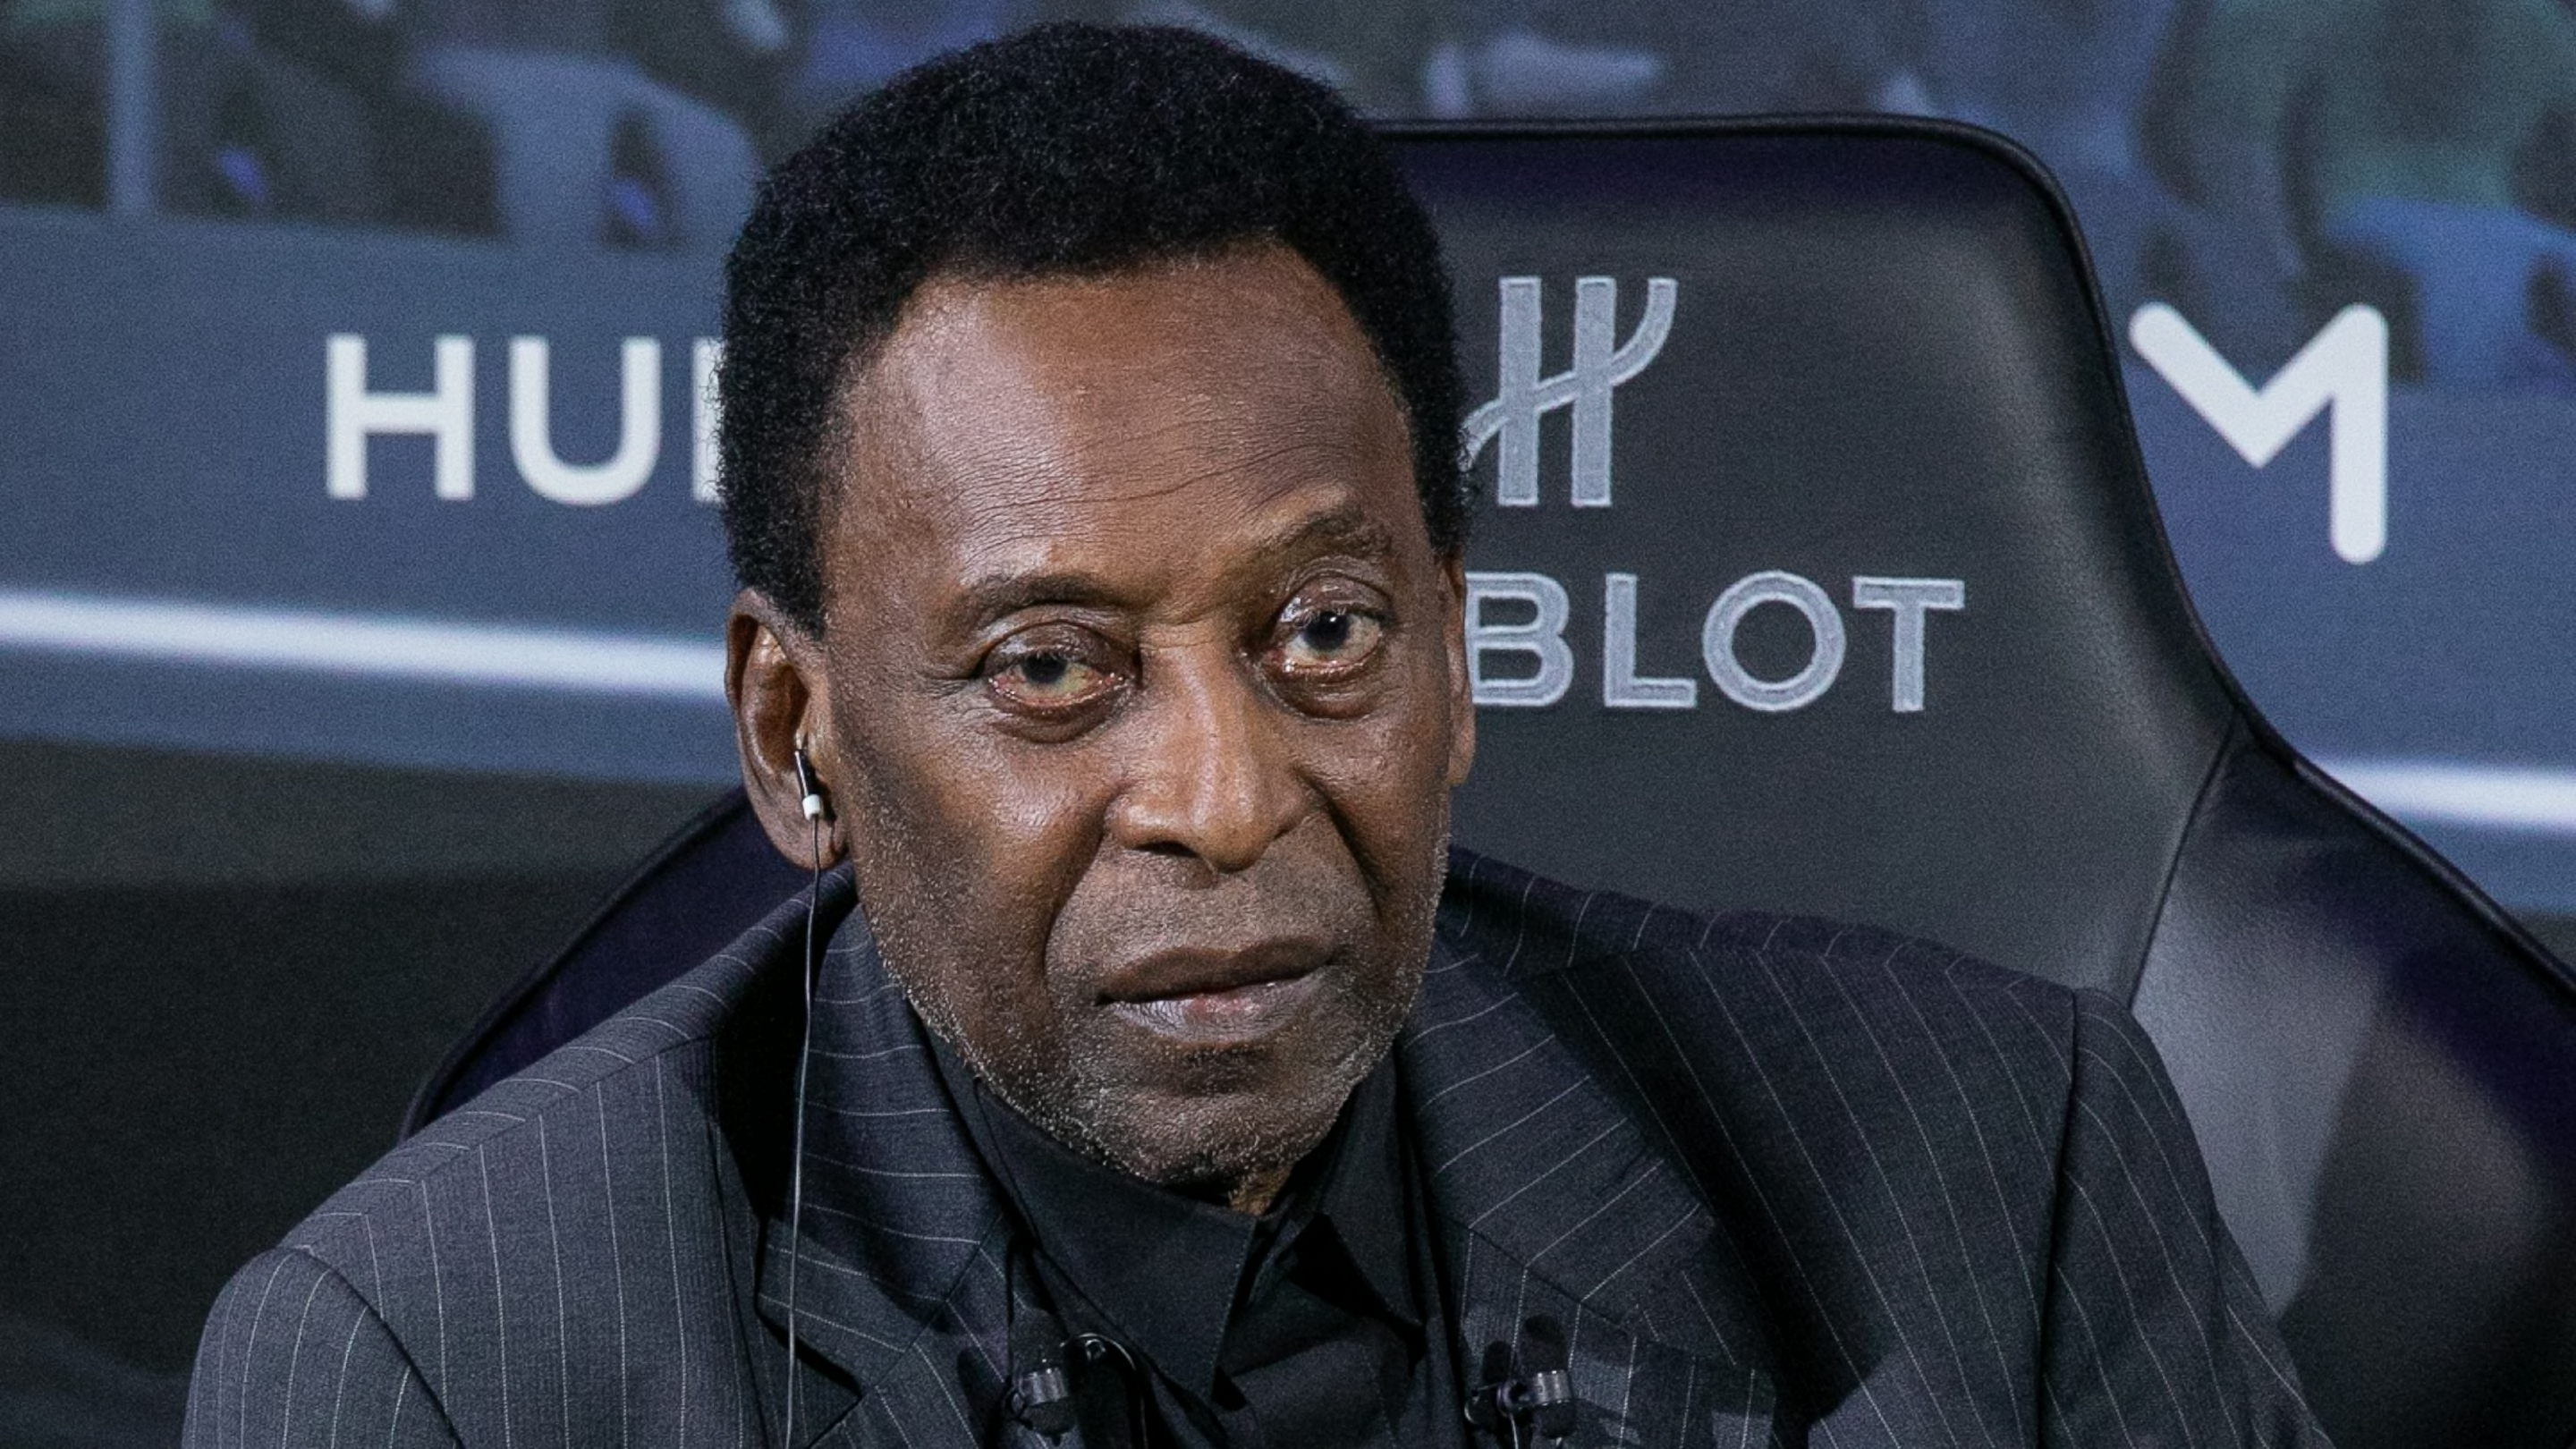 Pele transferred to palliative care after no longer responding to chemotherapy